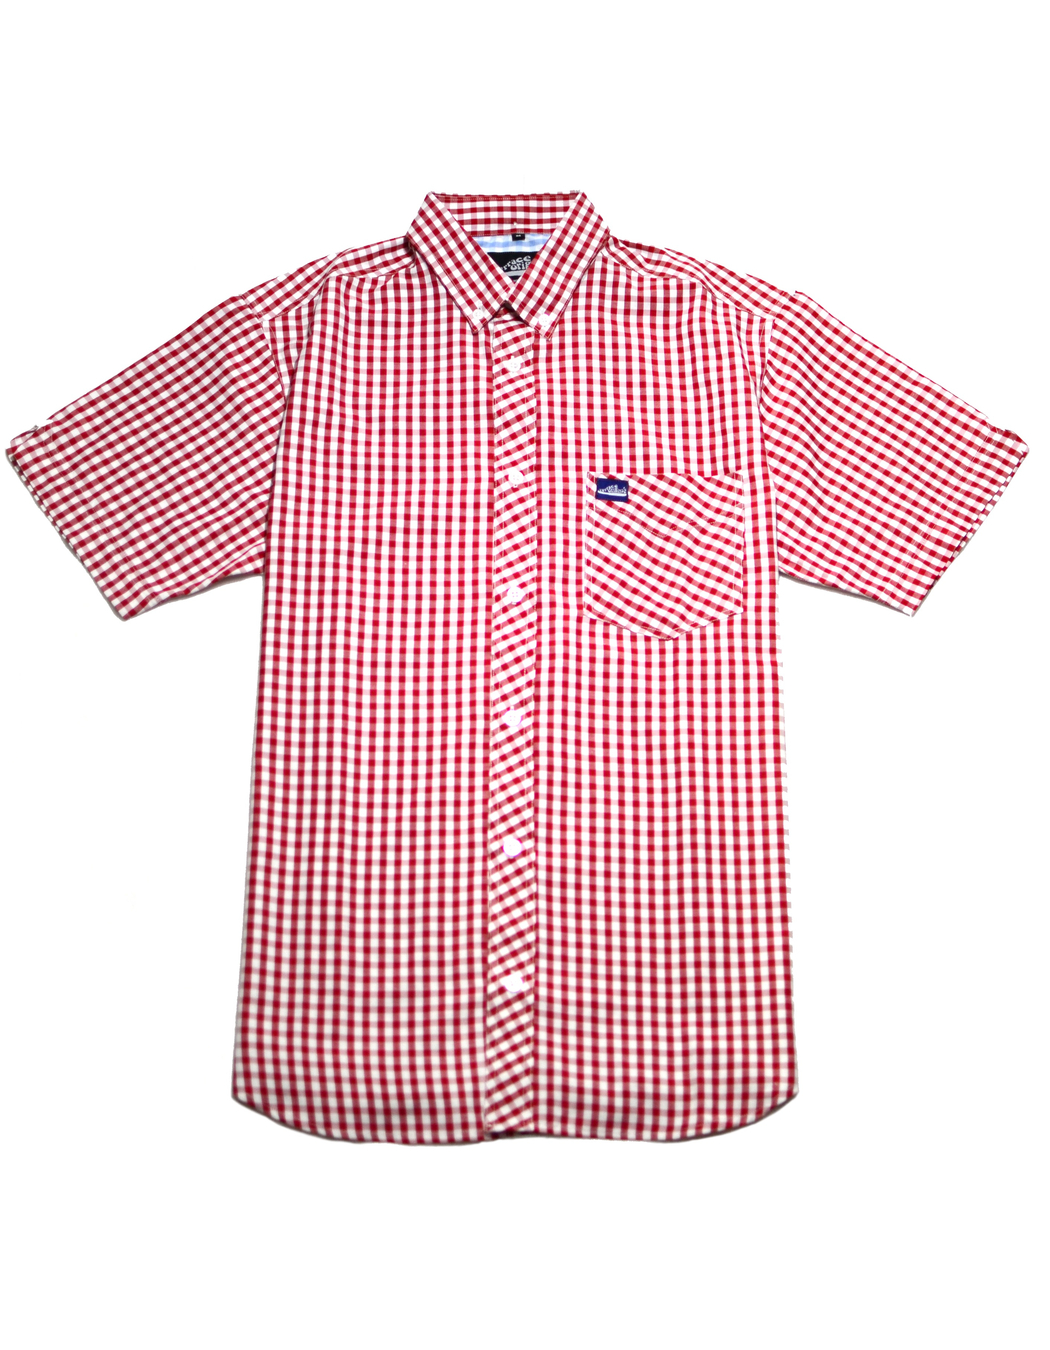 S/S Gingham Double Check Shirt - Red/White | Terrace Originals